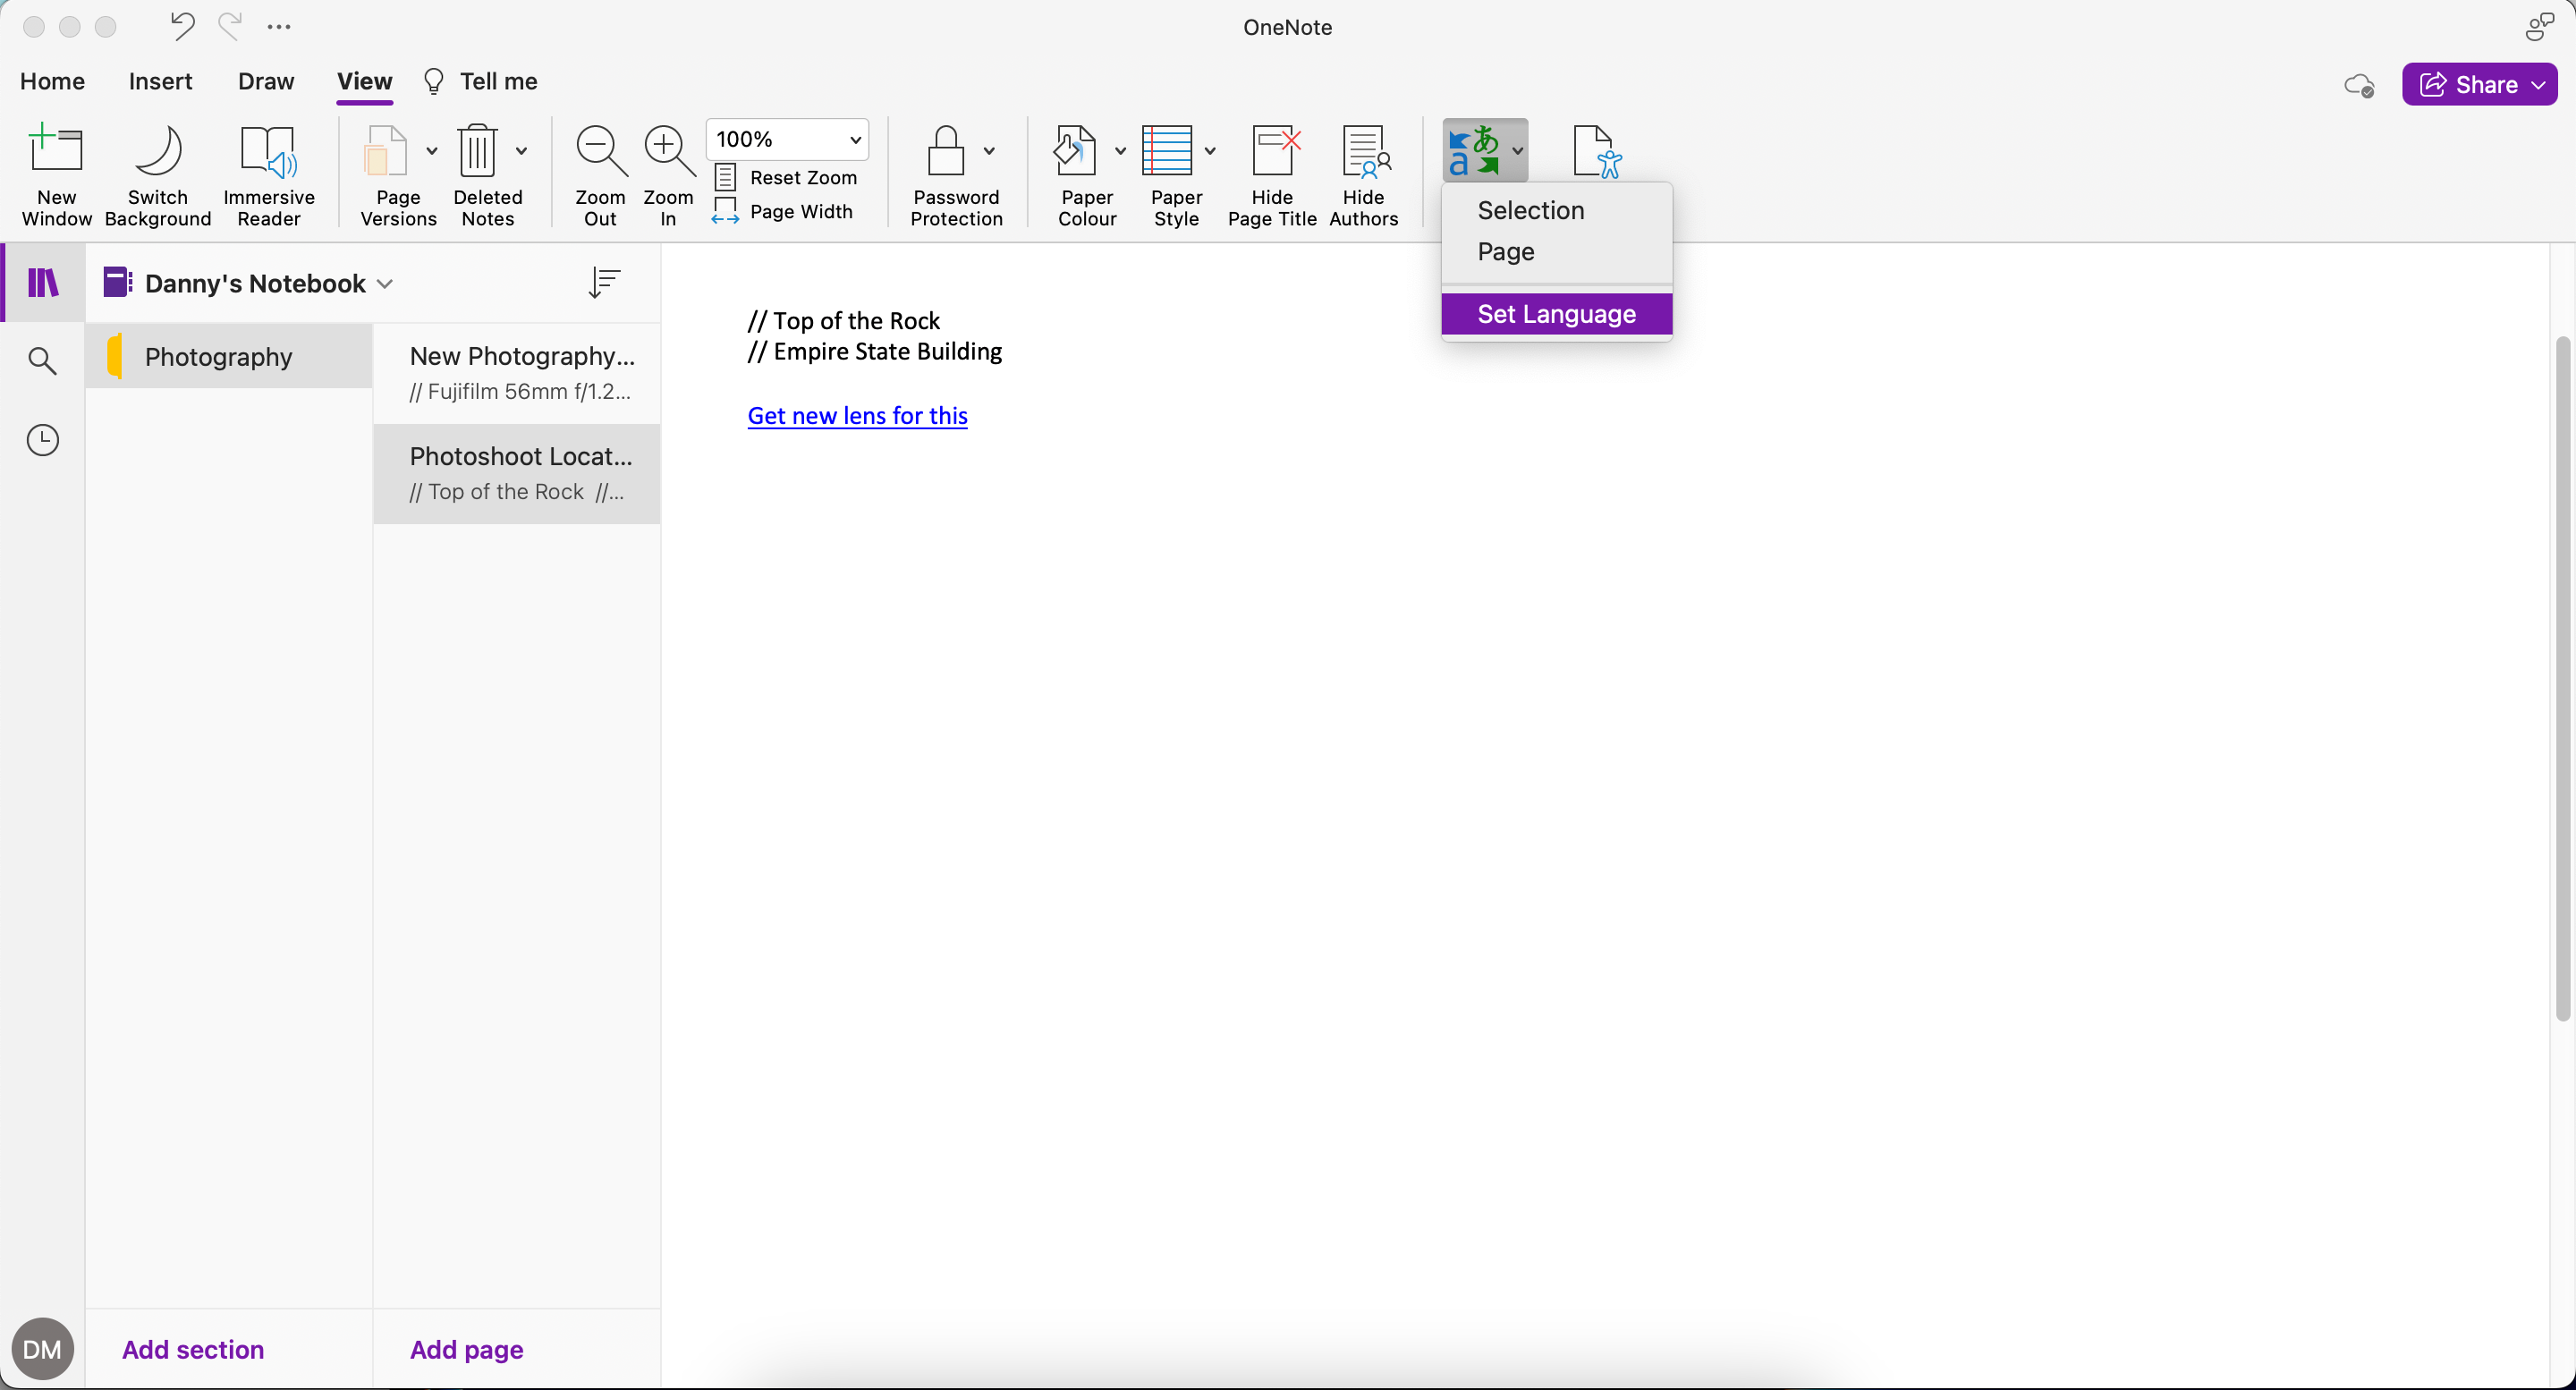 Set a New Language in OneNote to Translate To